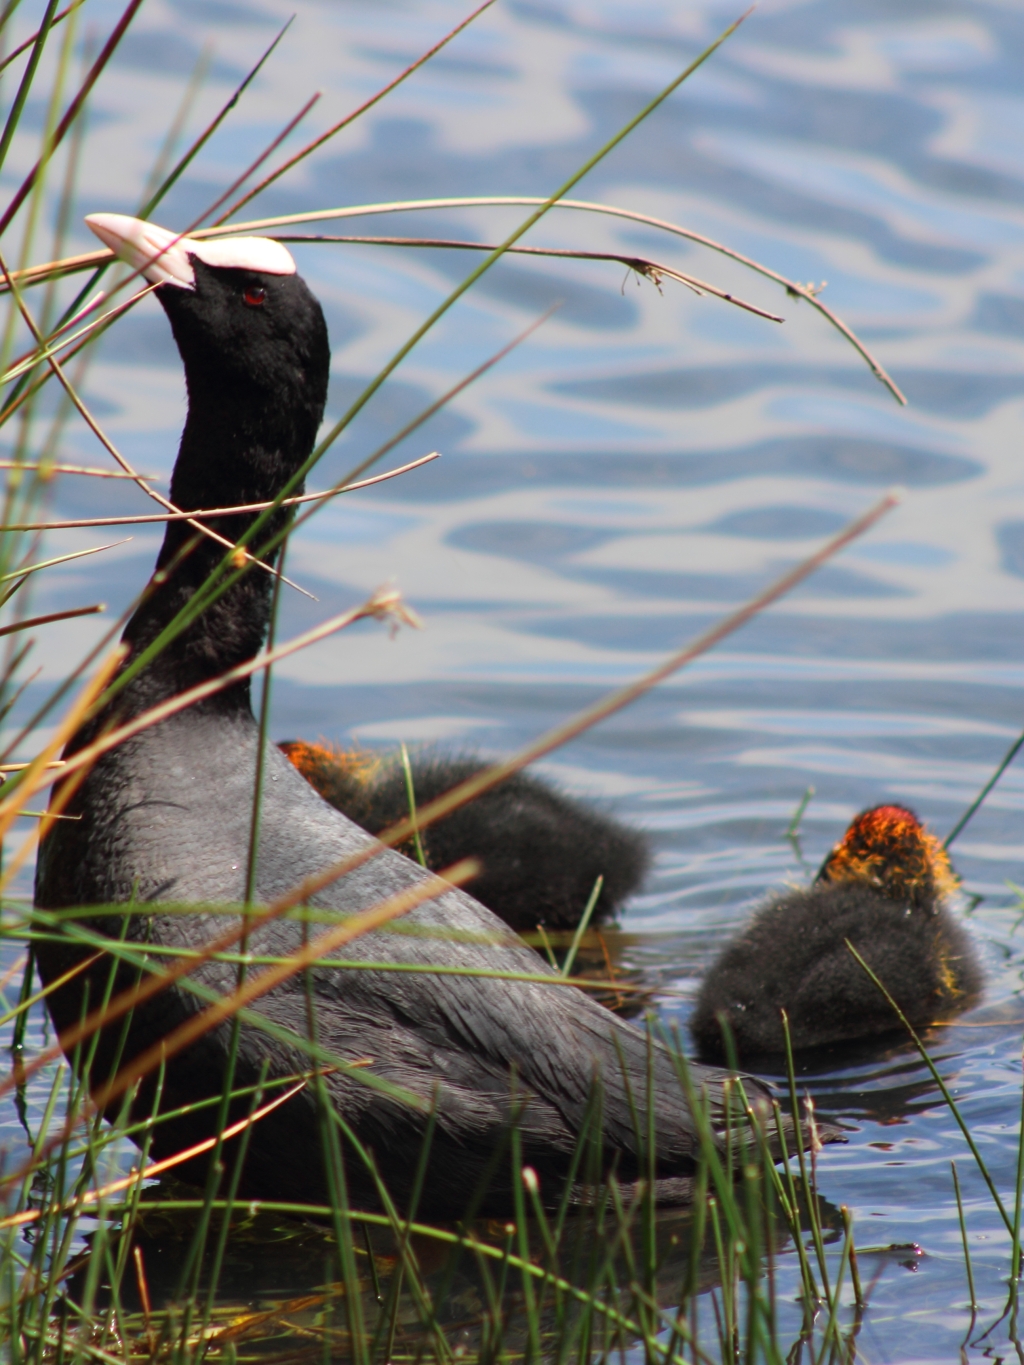 Coot with Chicks in Richmond Park, London